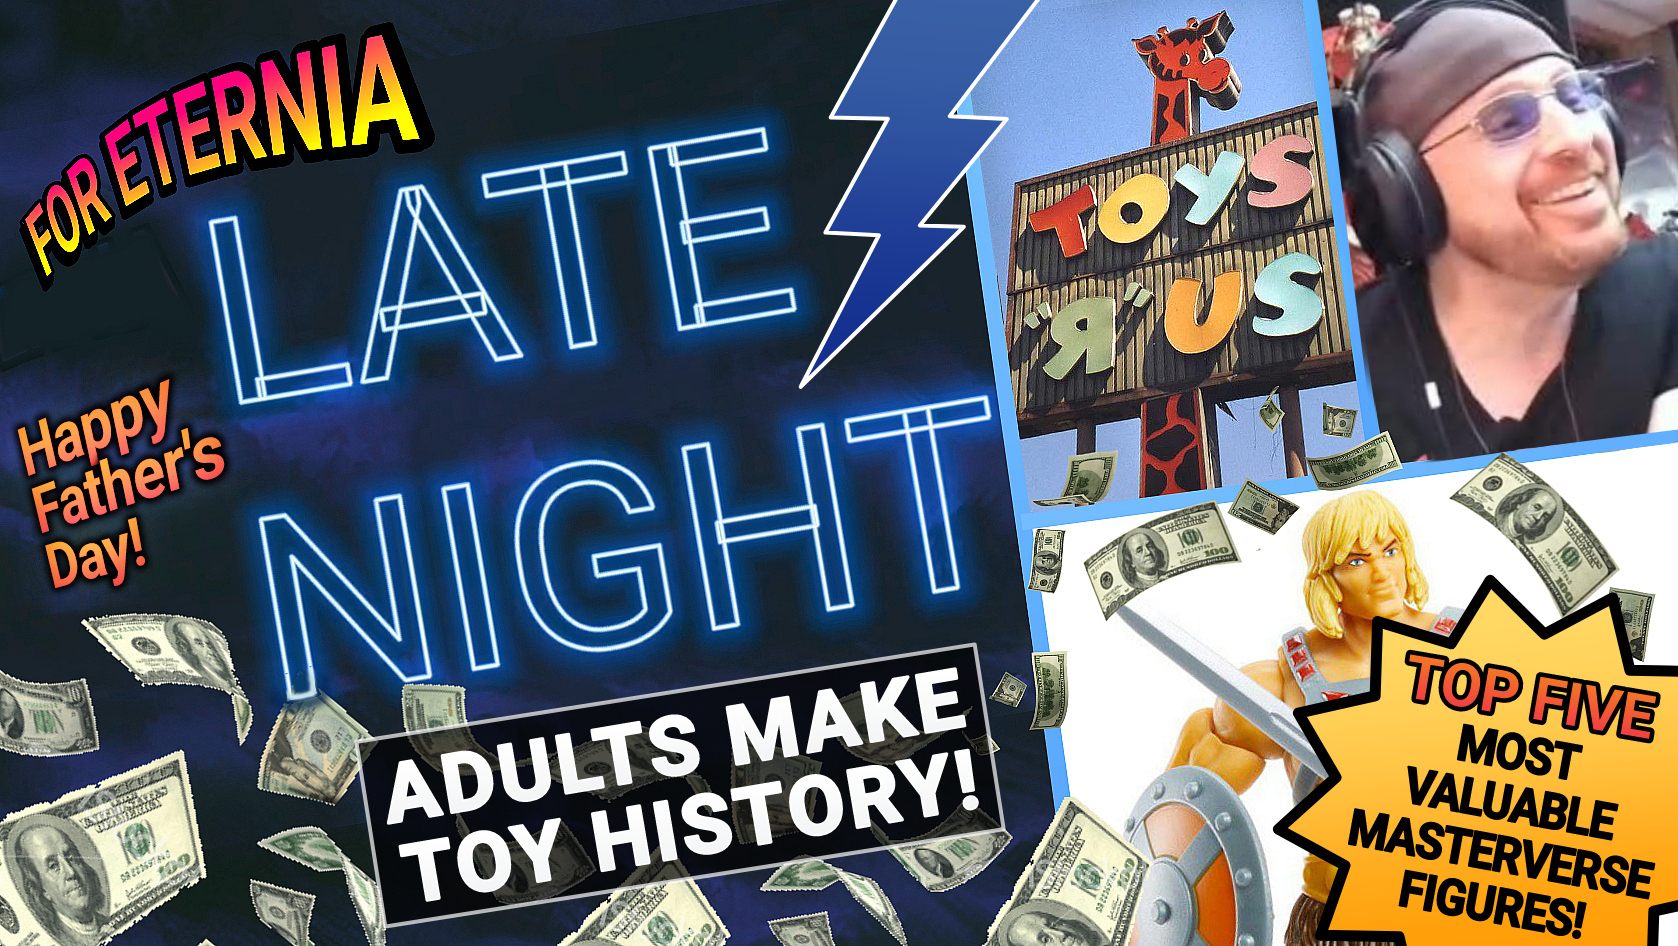 FOR ETERNIA LATE NIGHT! Adults make Toy History, the Top-5 Most Valuable Masterverse Figures & More!